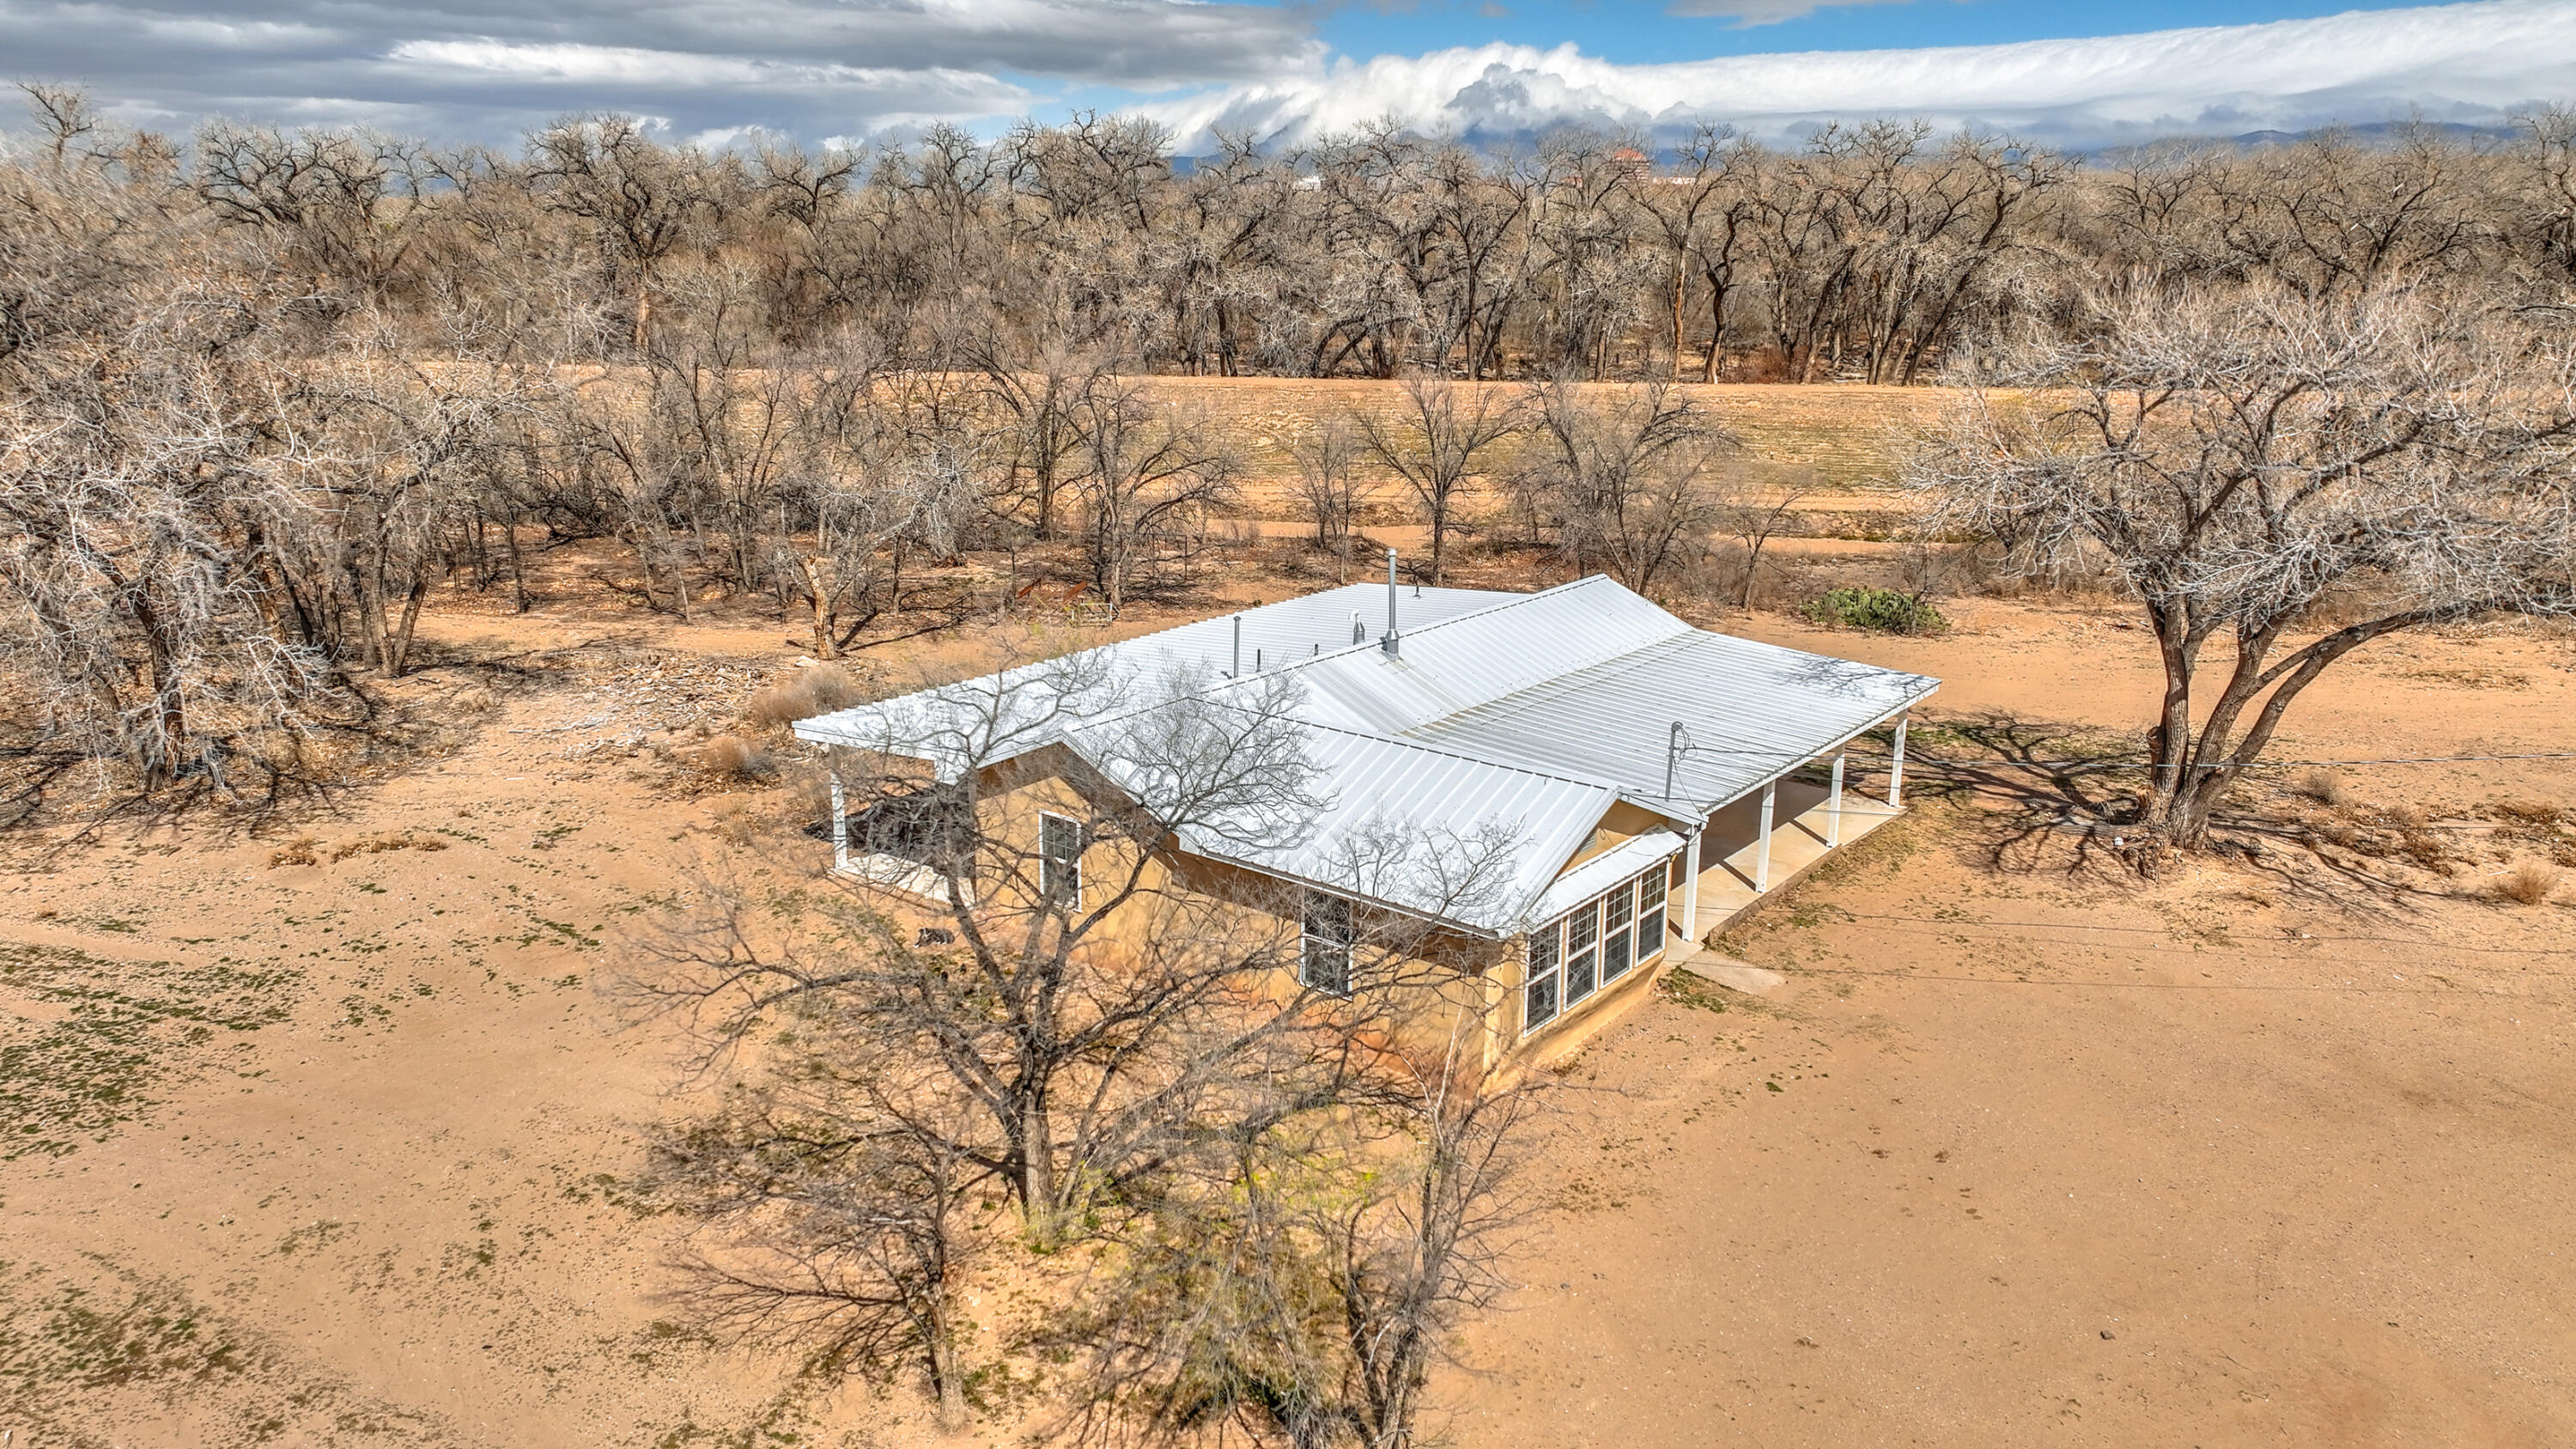 A Rare Find in Albuquerque! 3.81 ACRES, ON THE BOSQUE! Has a 1270 sqft Northern New Mexico Ranch Style Home, 2 bd, 2ba, is only 3 miles to Downtown. Adjacent to Valle Del Bosque Park and Open Space. Nearby bridge provides easy access into the Bosque and Hiking Trails. Currently A-1 zoning. Has a number of fruit trees. Could possibly be rezoned to R1 for subdivision.